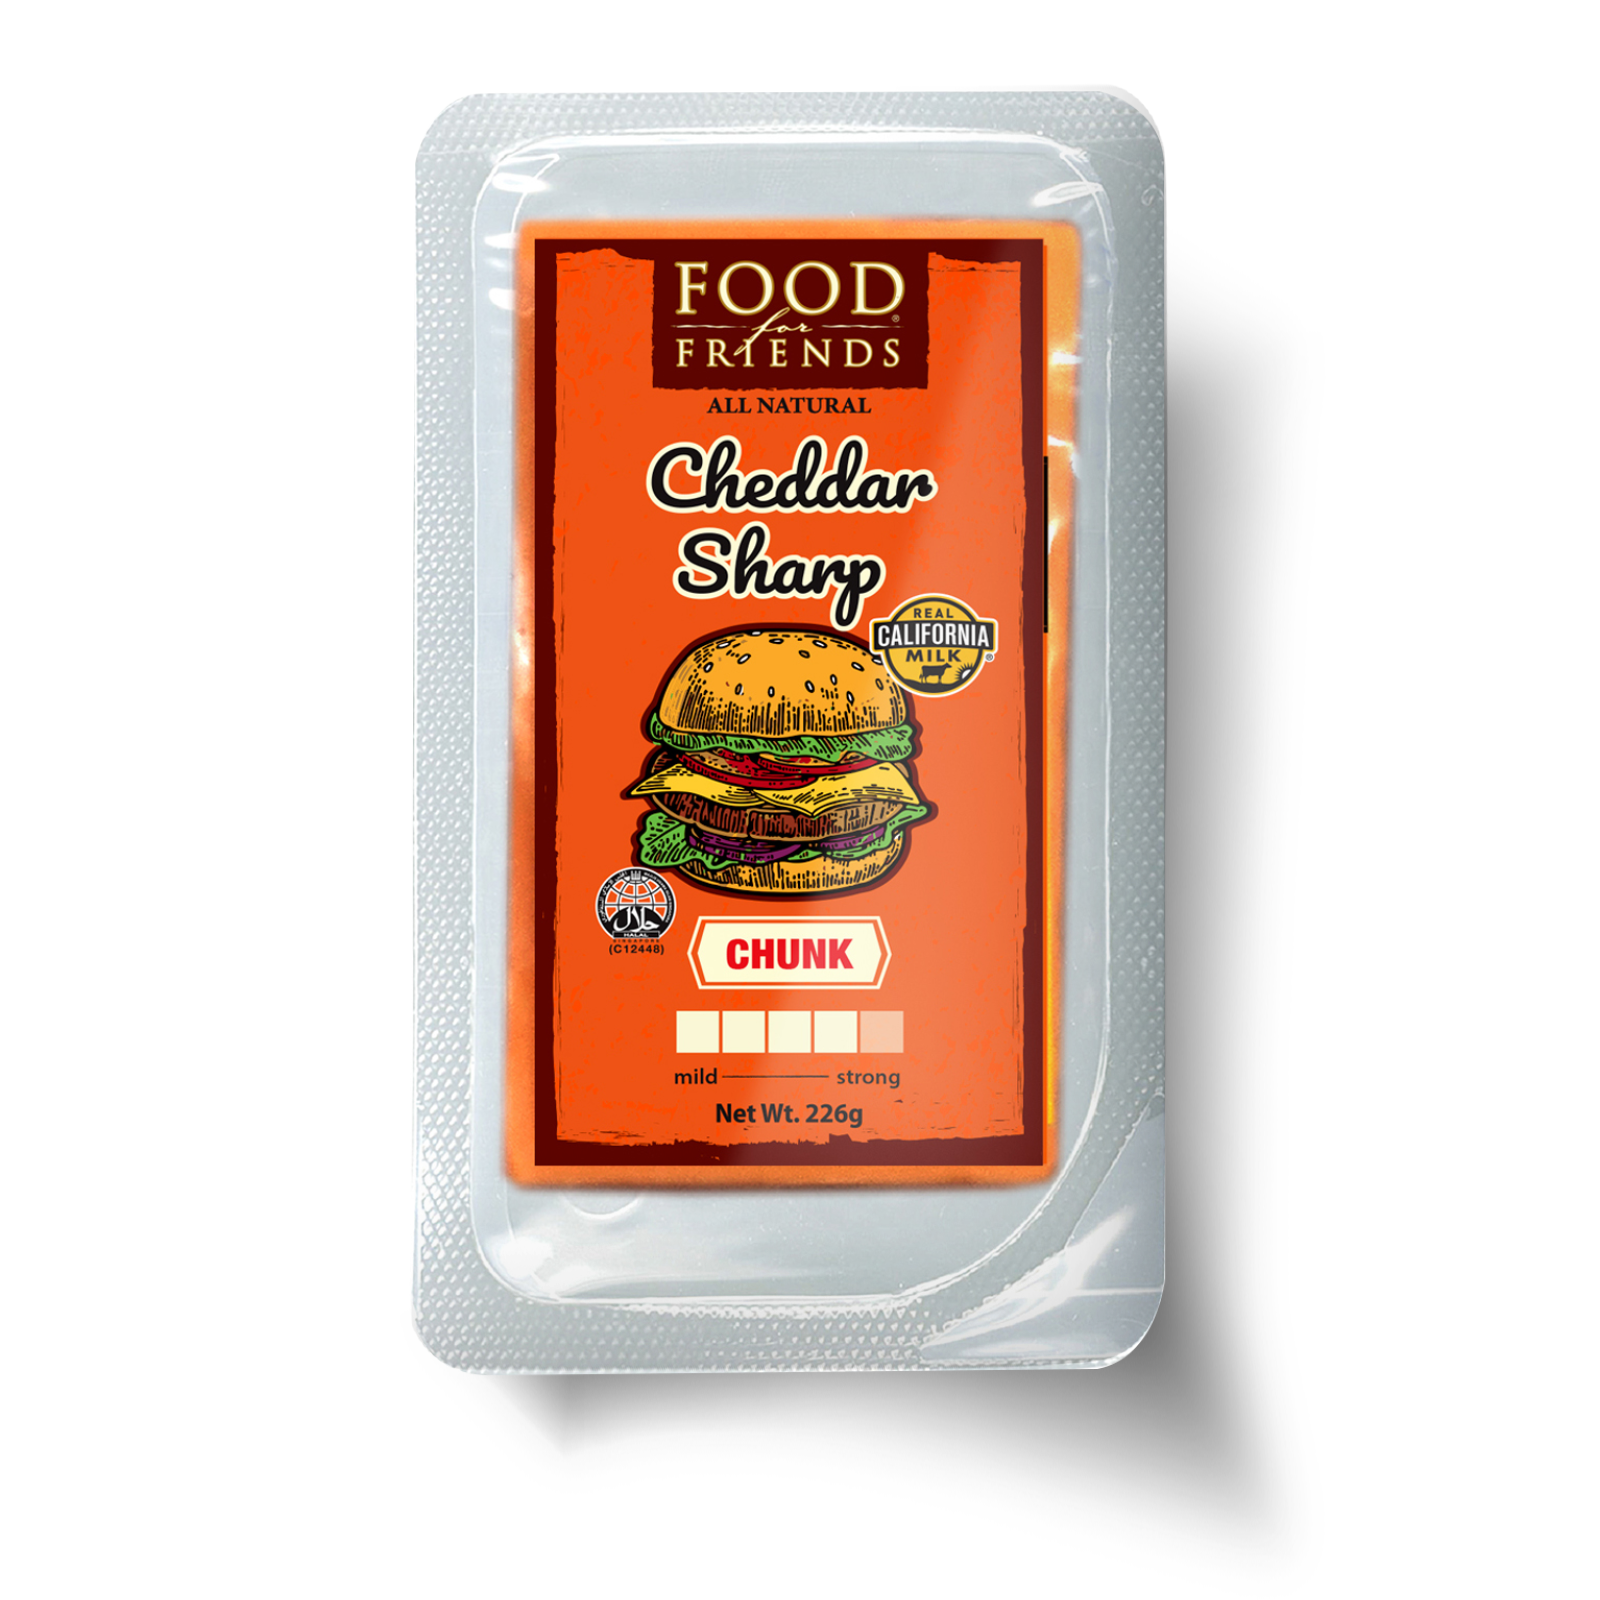 Food For Friends Cheese - Chunk 8Oz